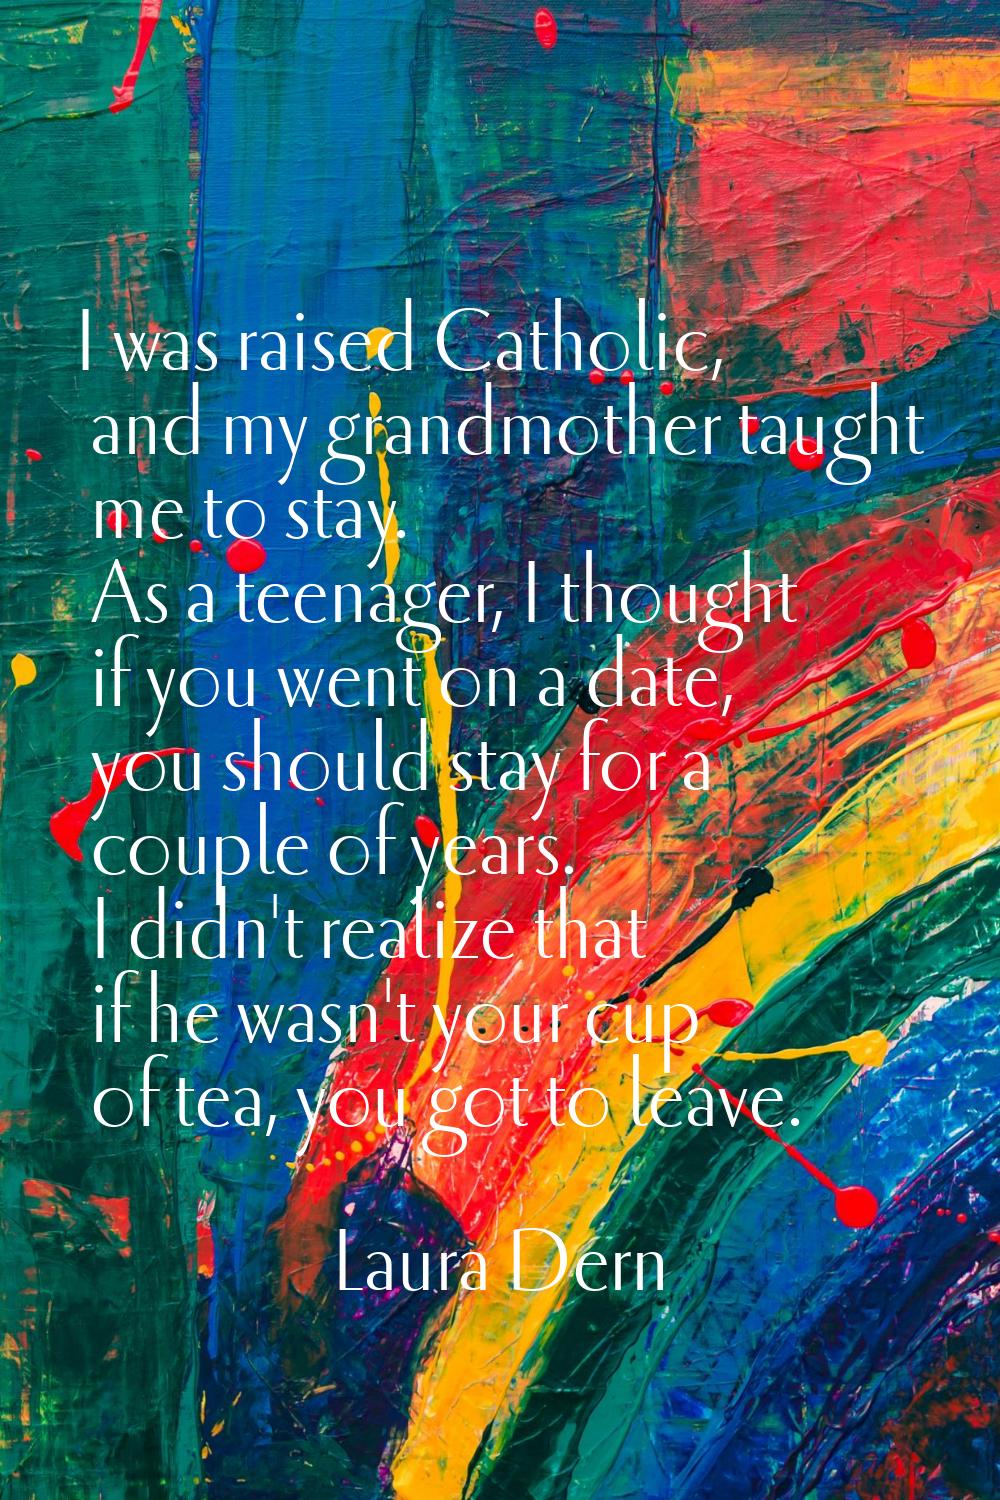 I was raised Catholic, and my grandmother taught me to stay. As a teenager, I thought if you went o